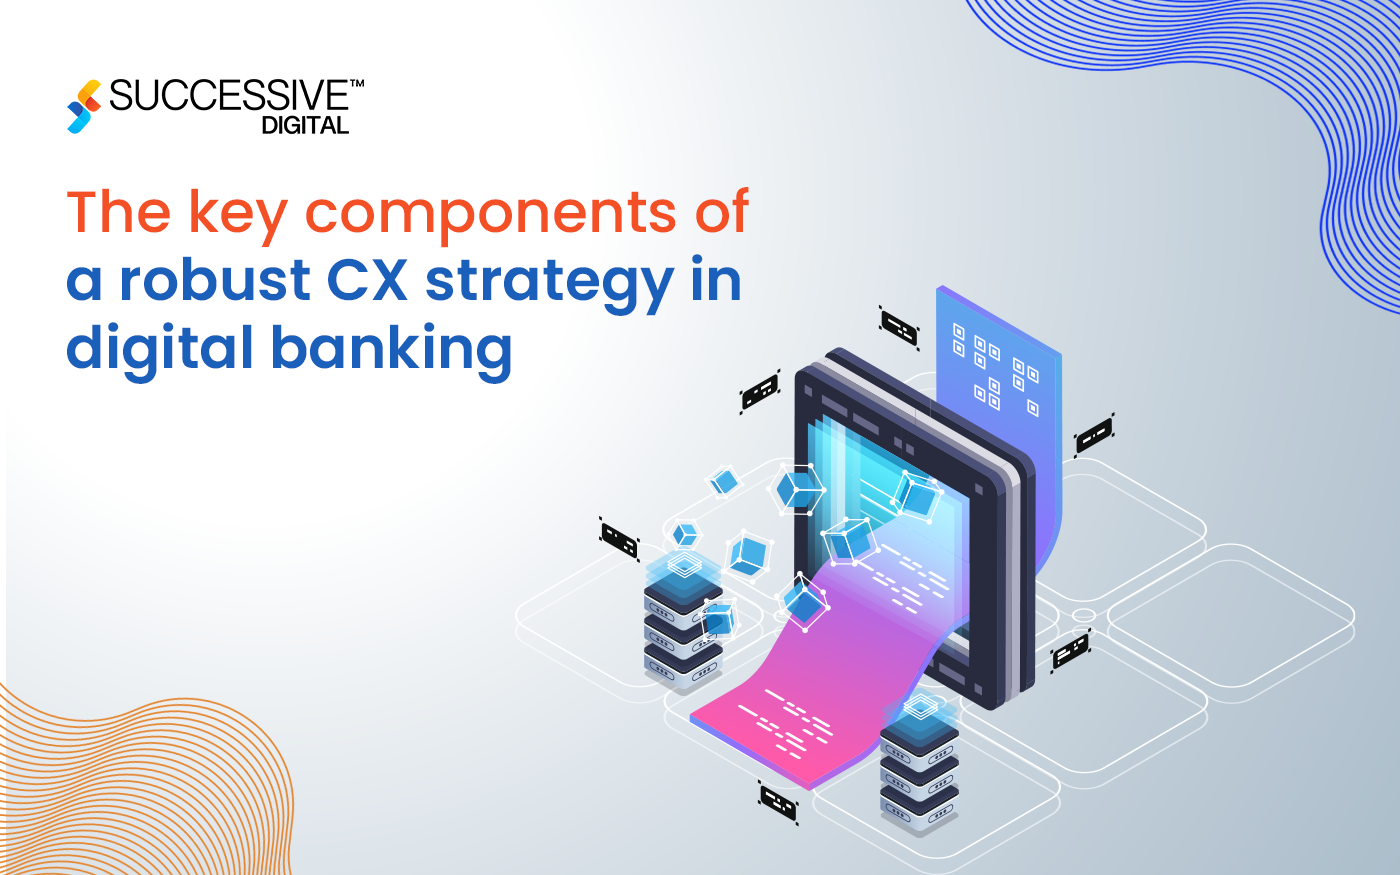 What are the Key Components of a Robust CX Strategy in Digital Banking?